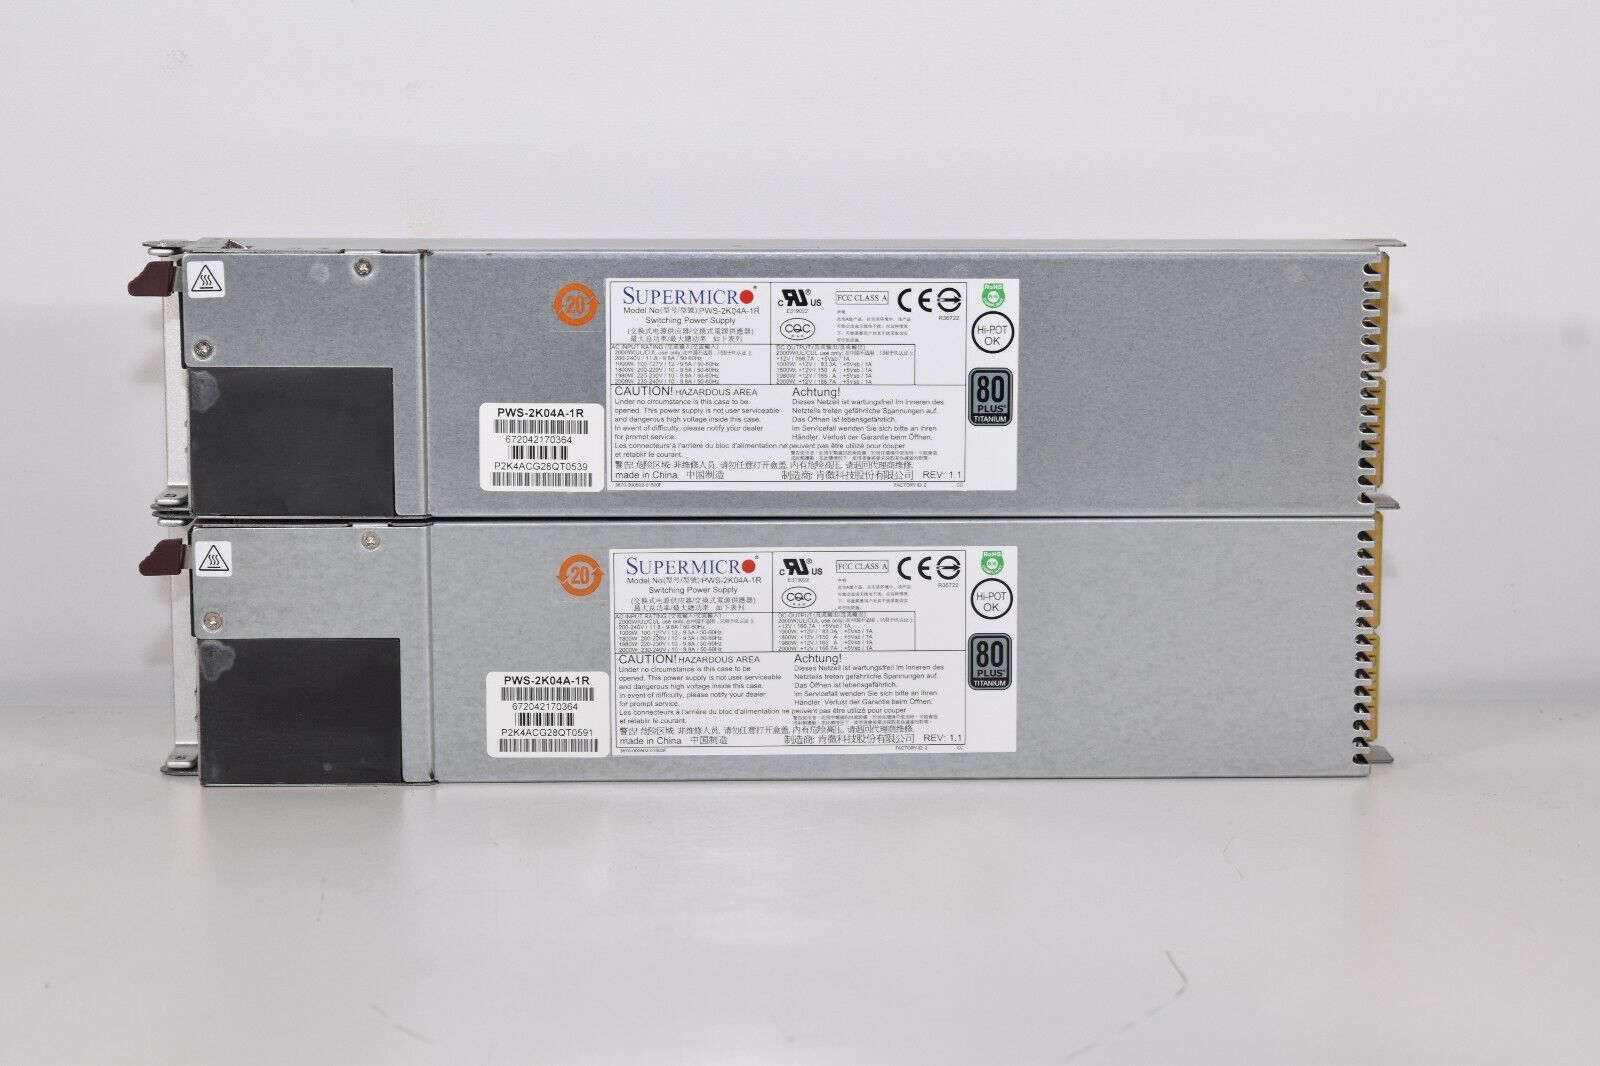 LOT OF 2 Supermicro PWS-20K04A-1R 2000W Switching Power Supply 80 Plus Titanium